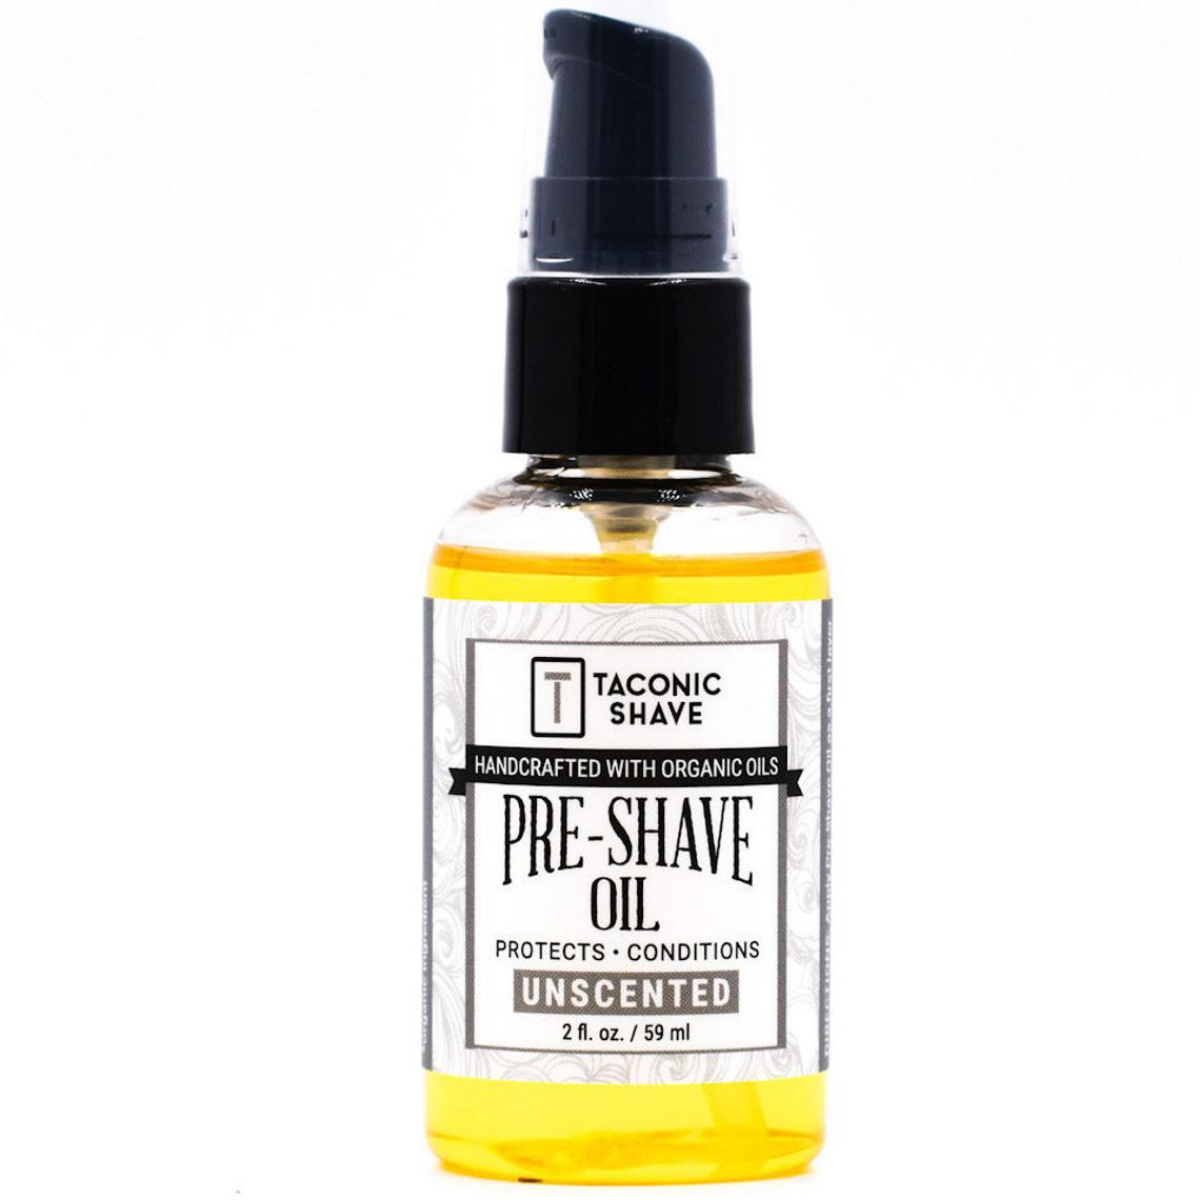 Primary image of Taconic Pre-Shave Oil